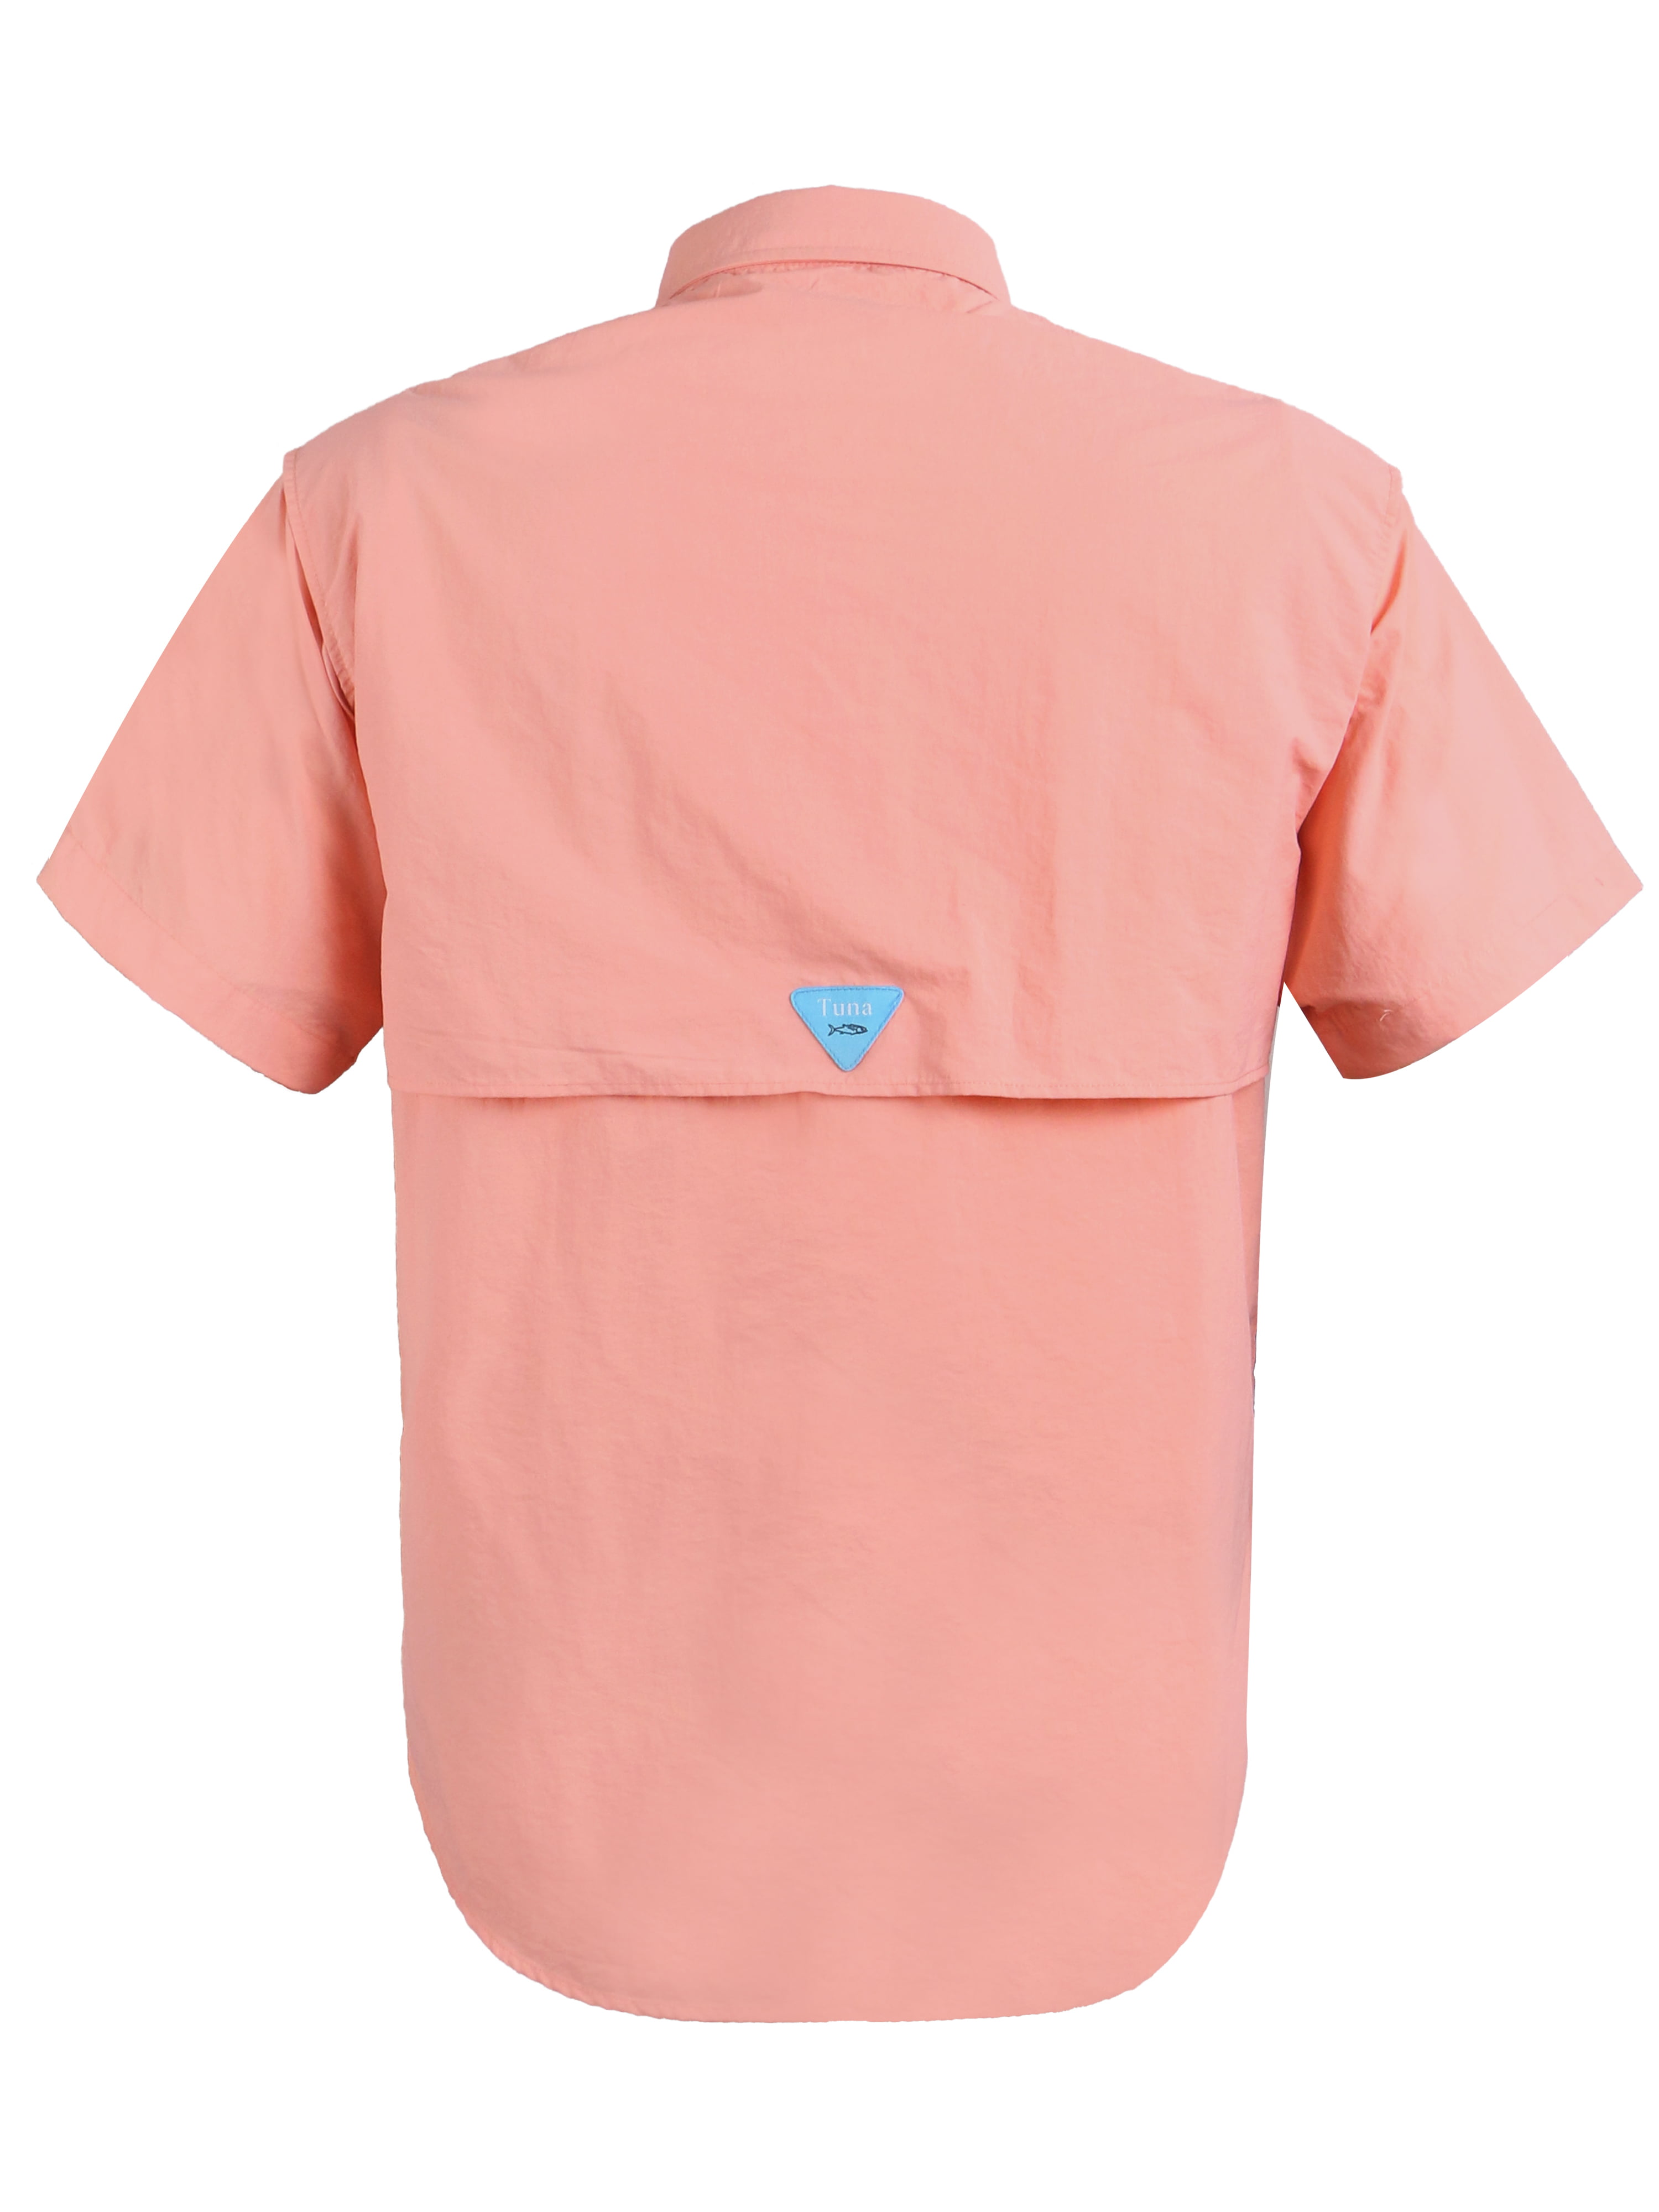 Spicy Tuna Shirt Mens Large Pink Button Up Short Sleeve Fishing Outdoor